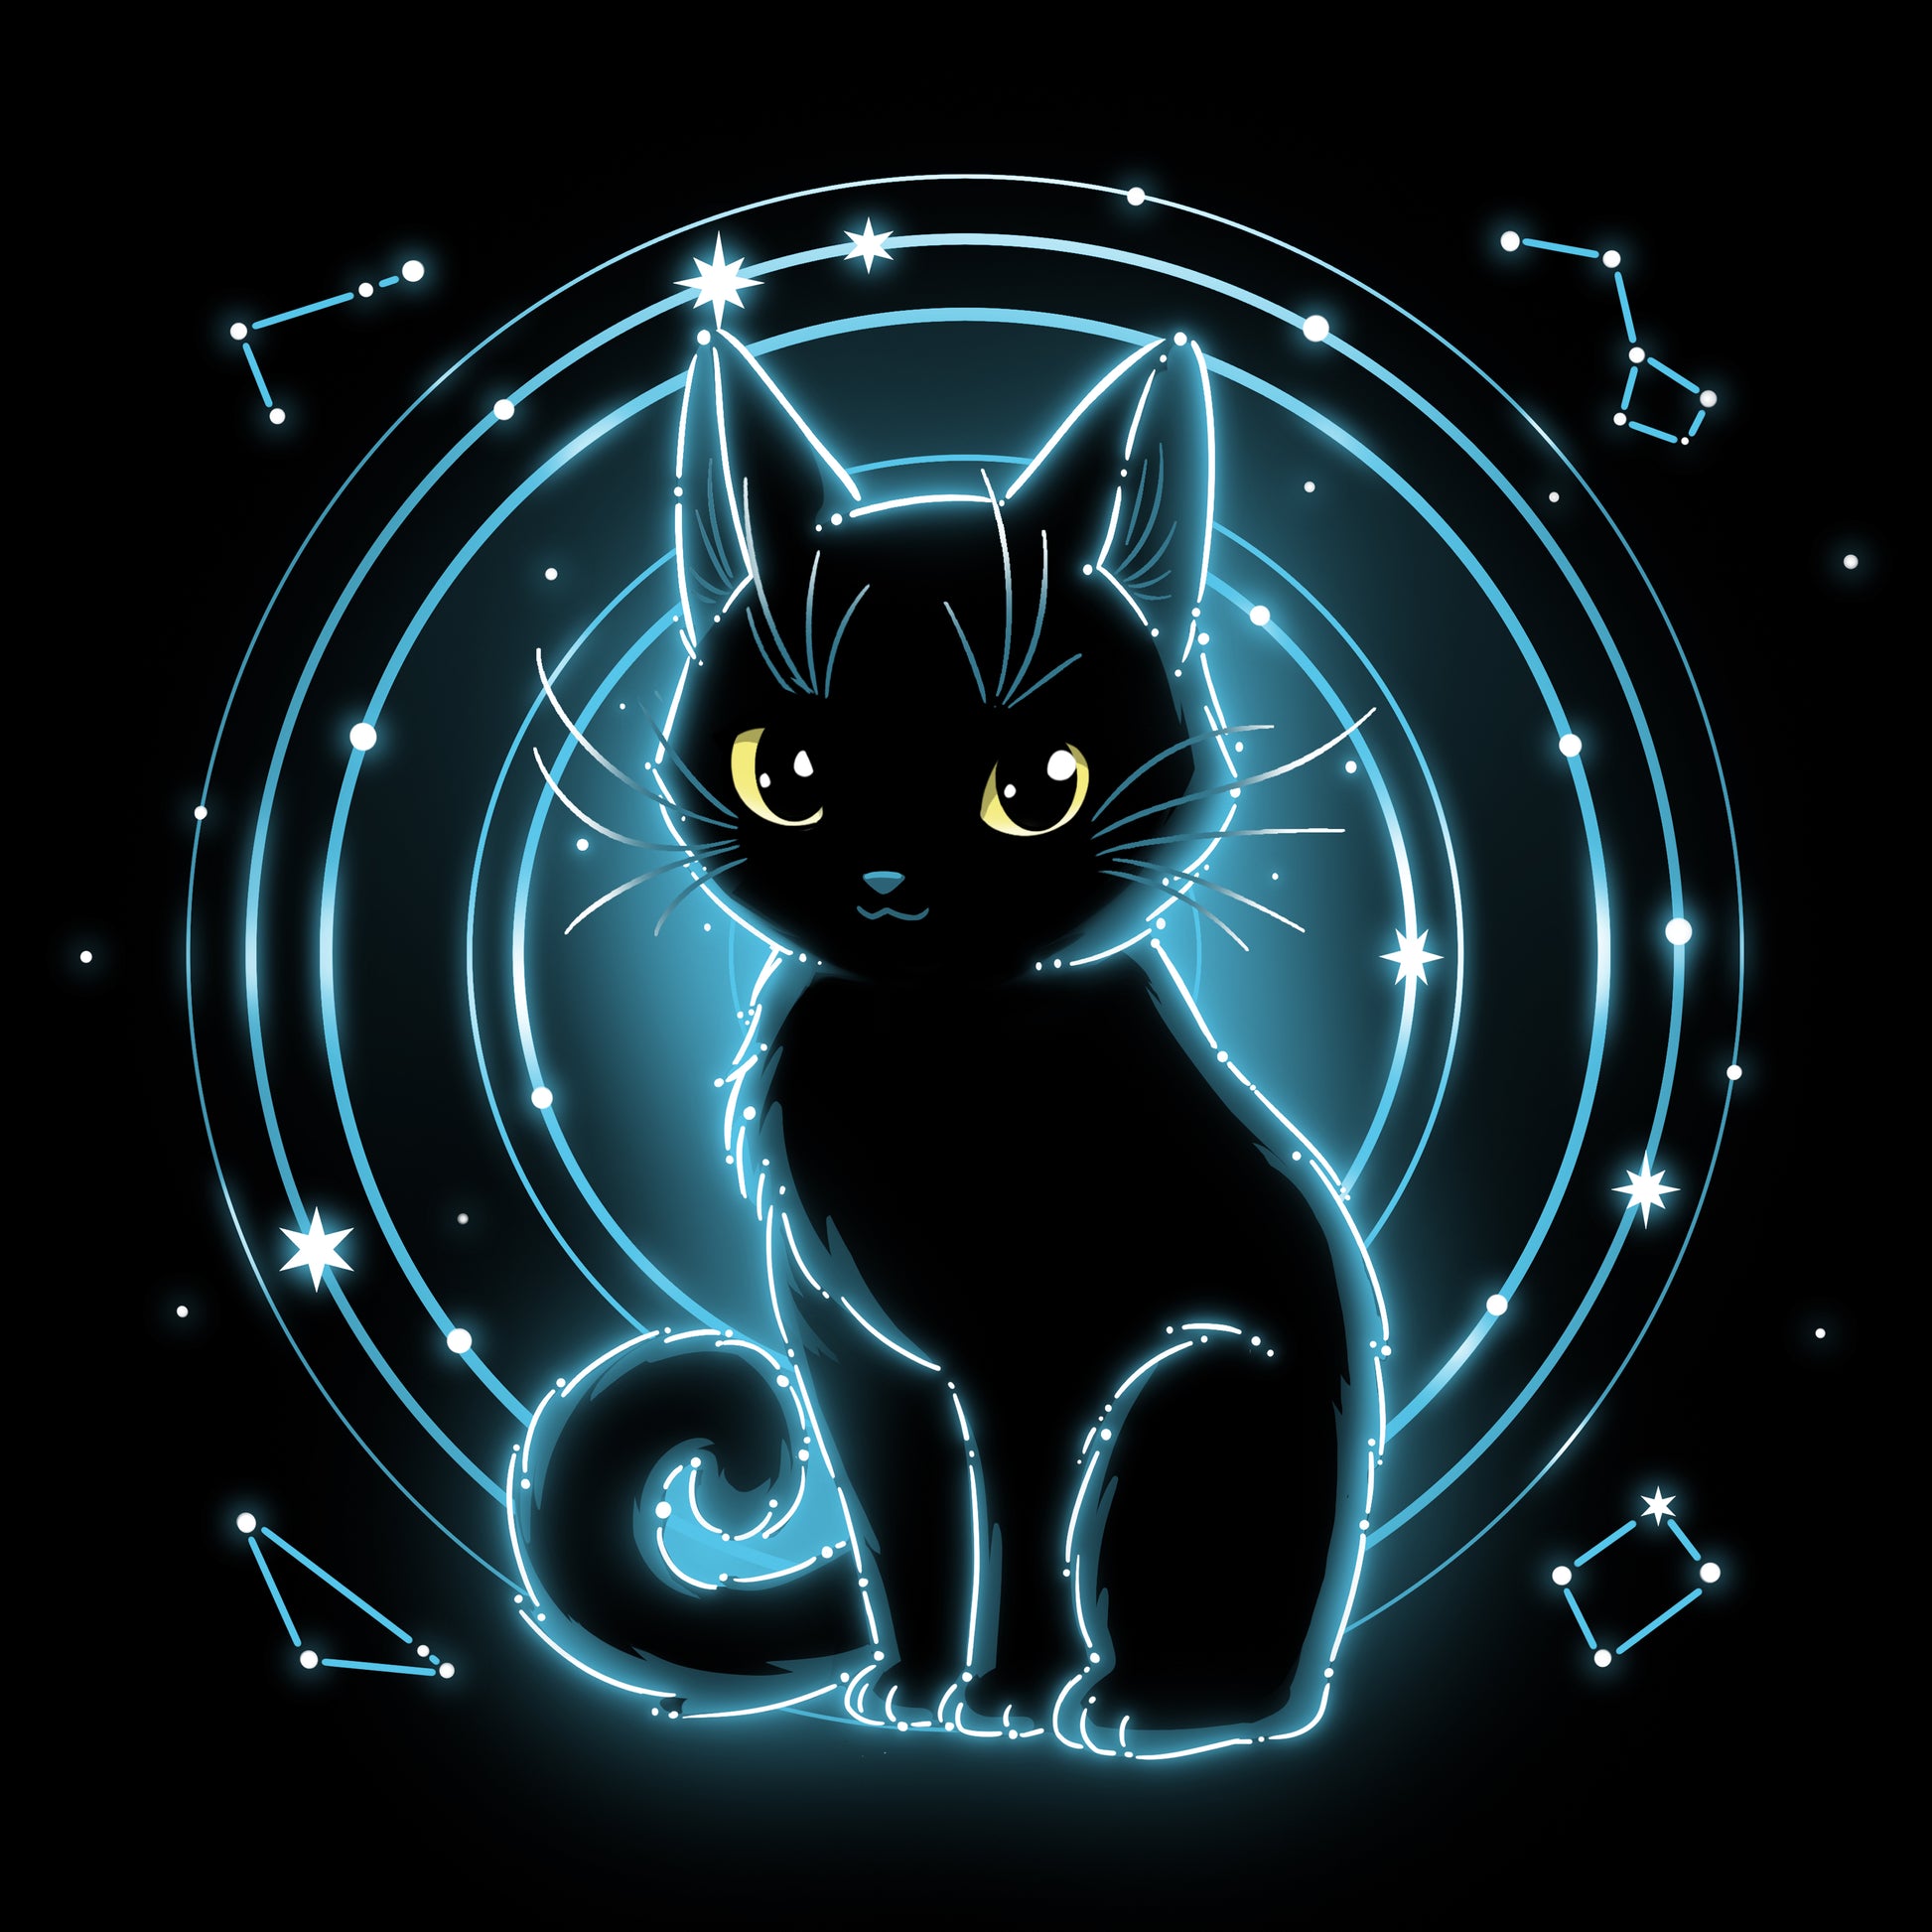 A Celestial Cat sitting on a black background with stars and constellations available on a TeeTurtle tee or t-shirt.